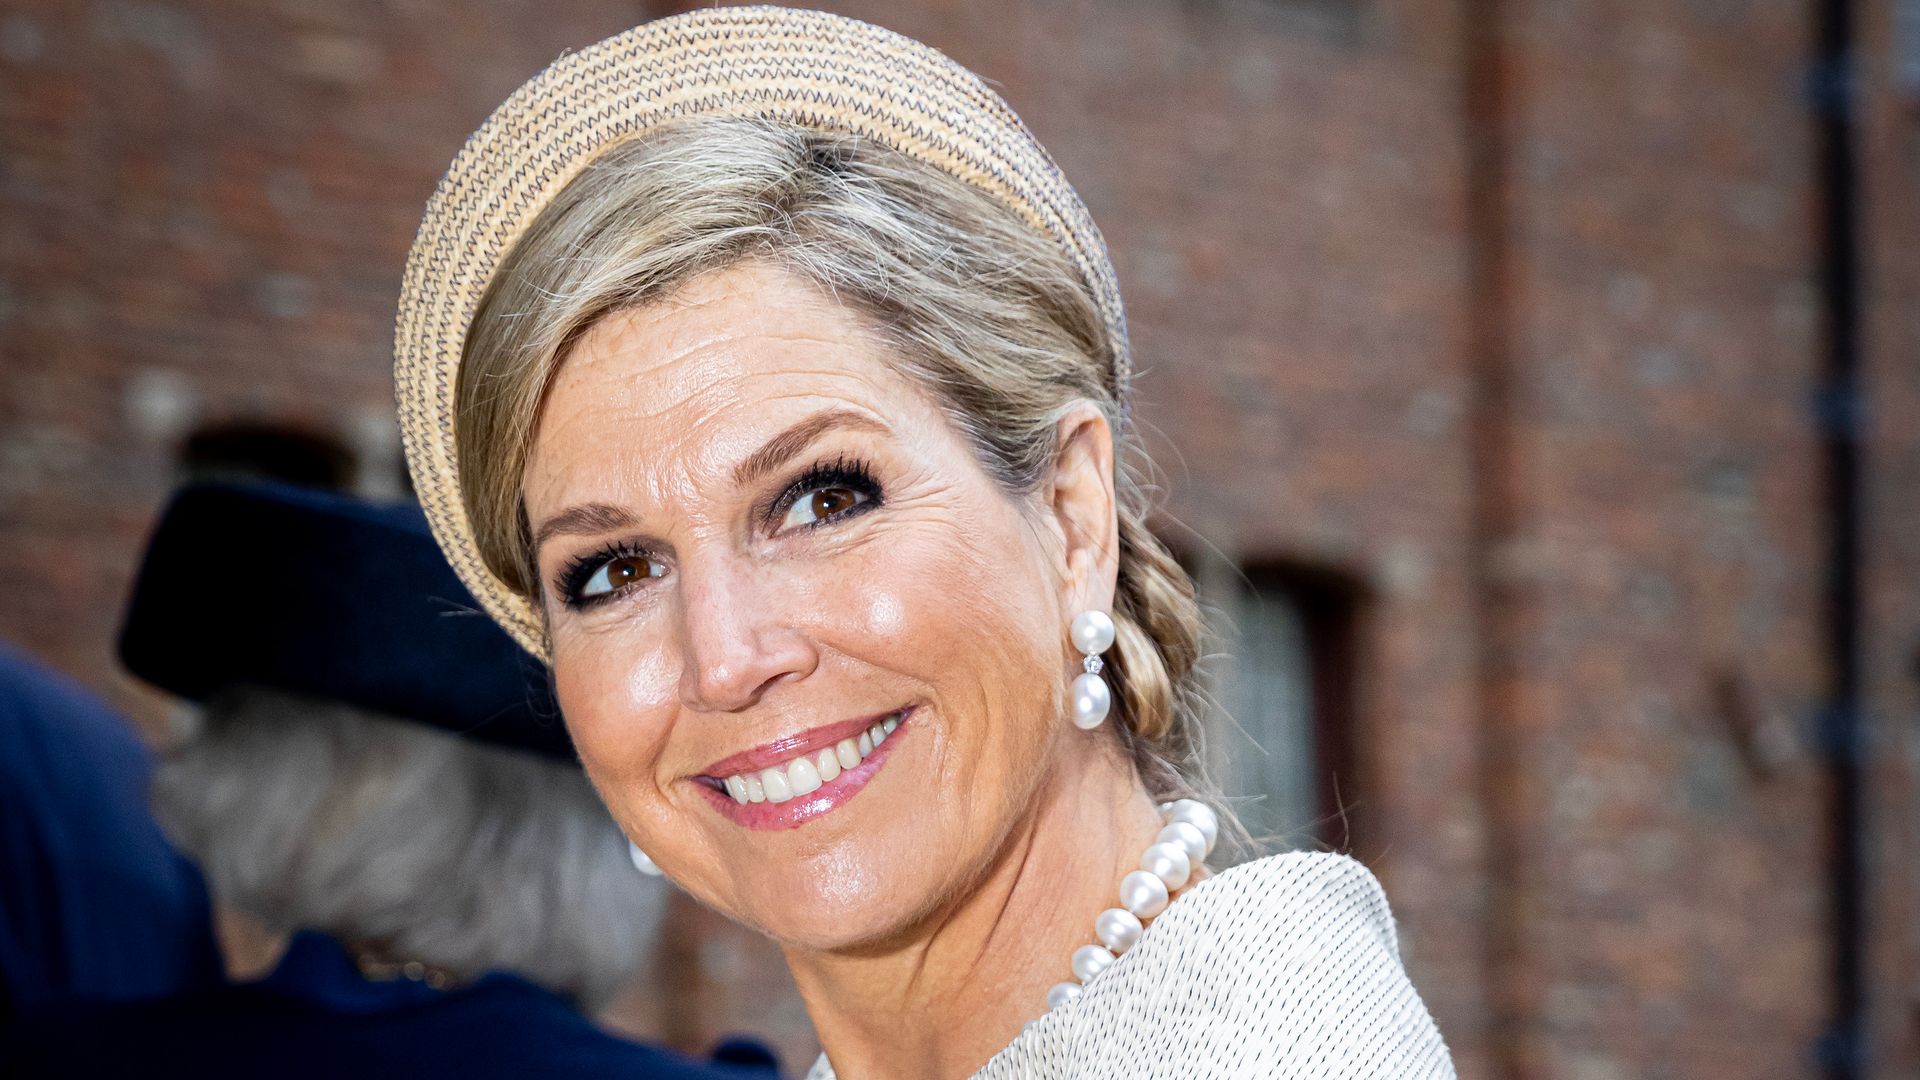 Queen Máxima could be a 60s bride in Audrey Hepburn-worthy skirt and waist-cinching jacket